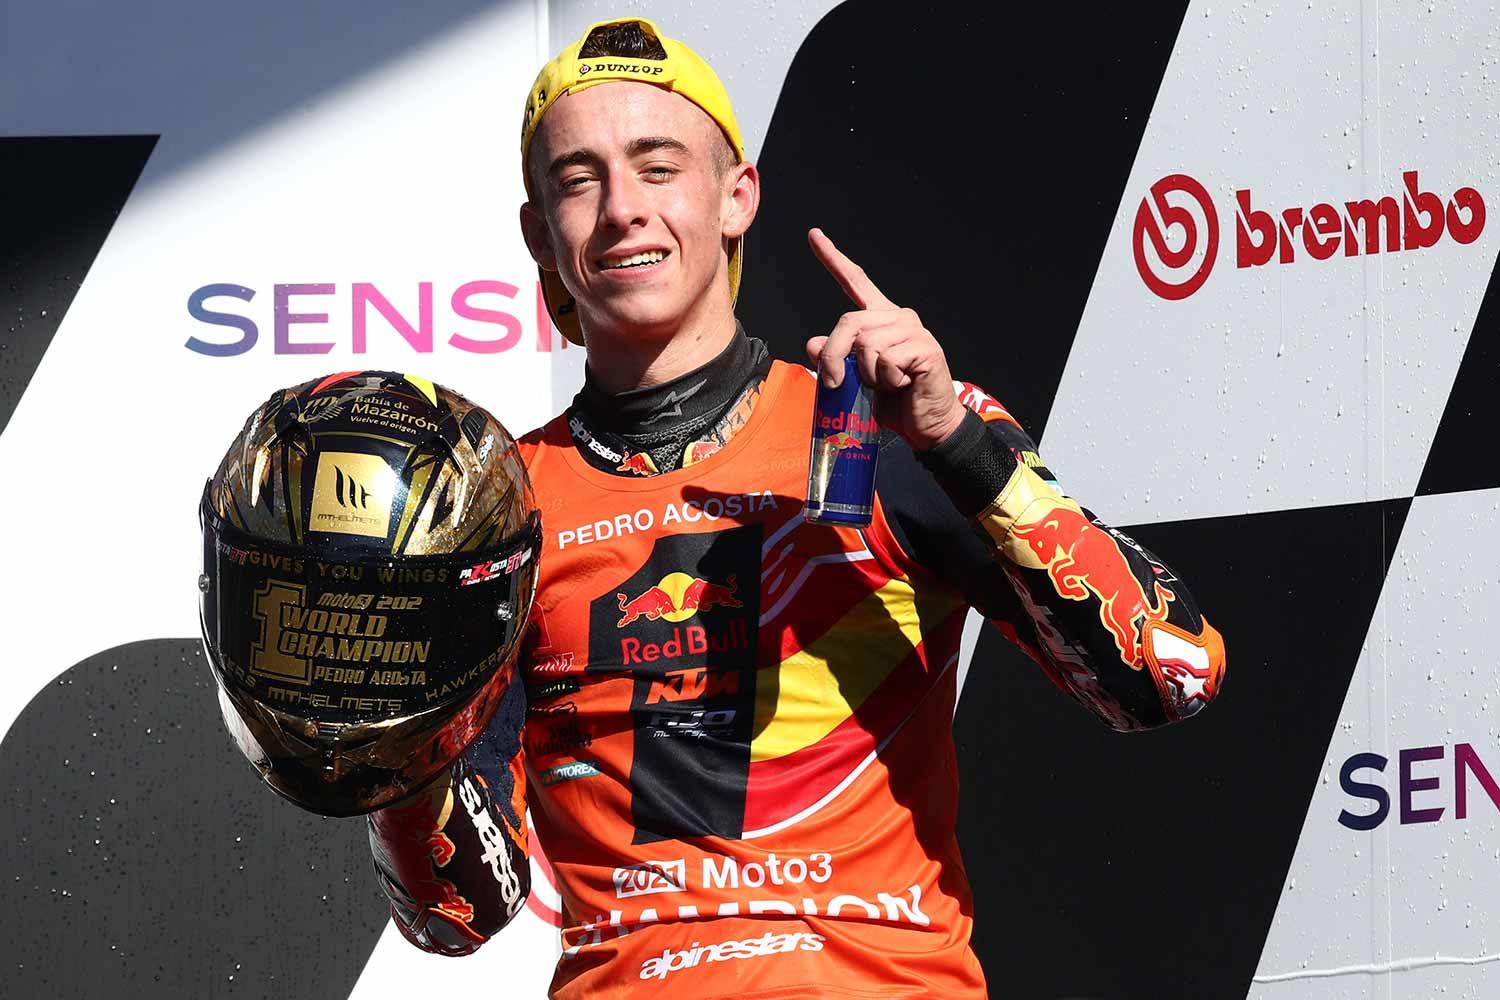 Moto3 Portimao: Pedro Acosta takes victory to secure the title | MCN